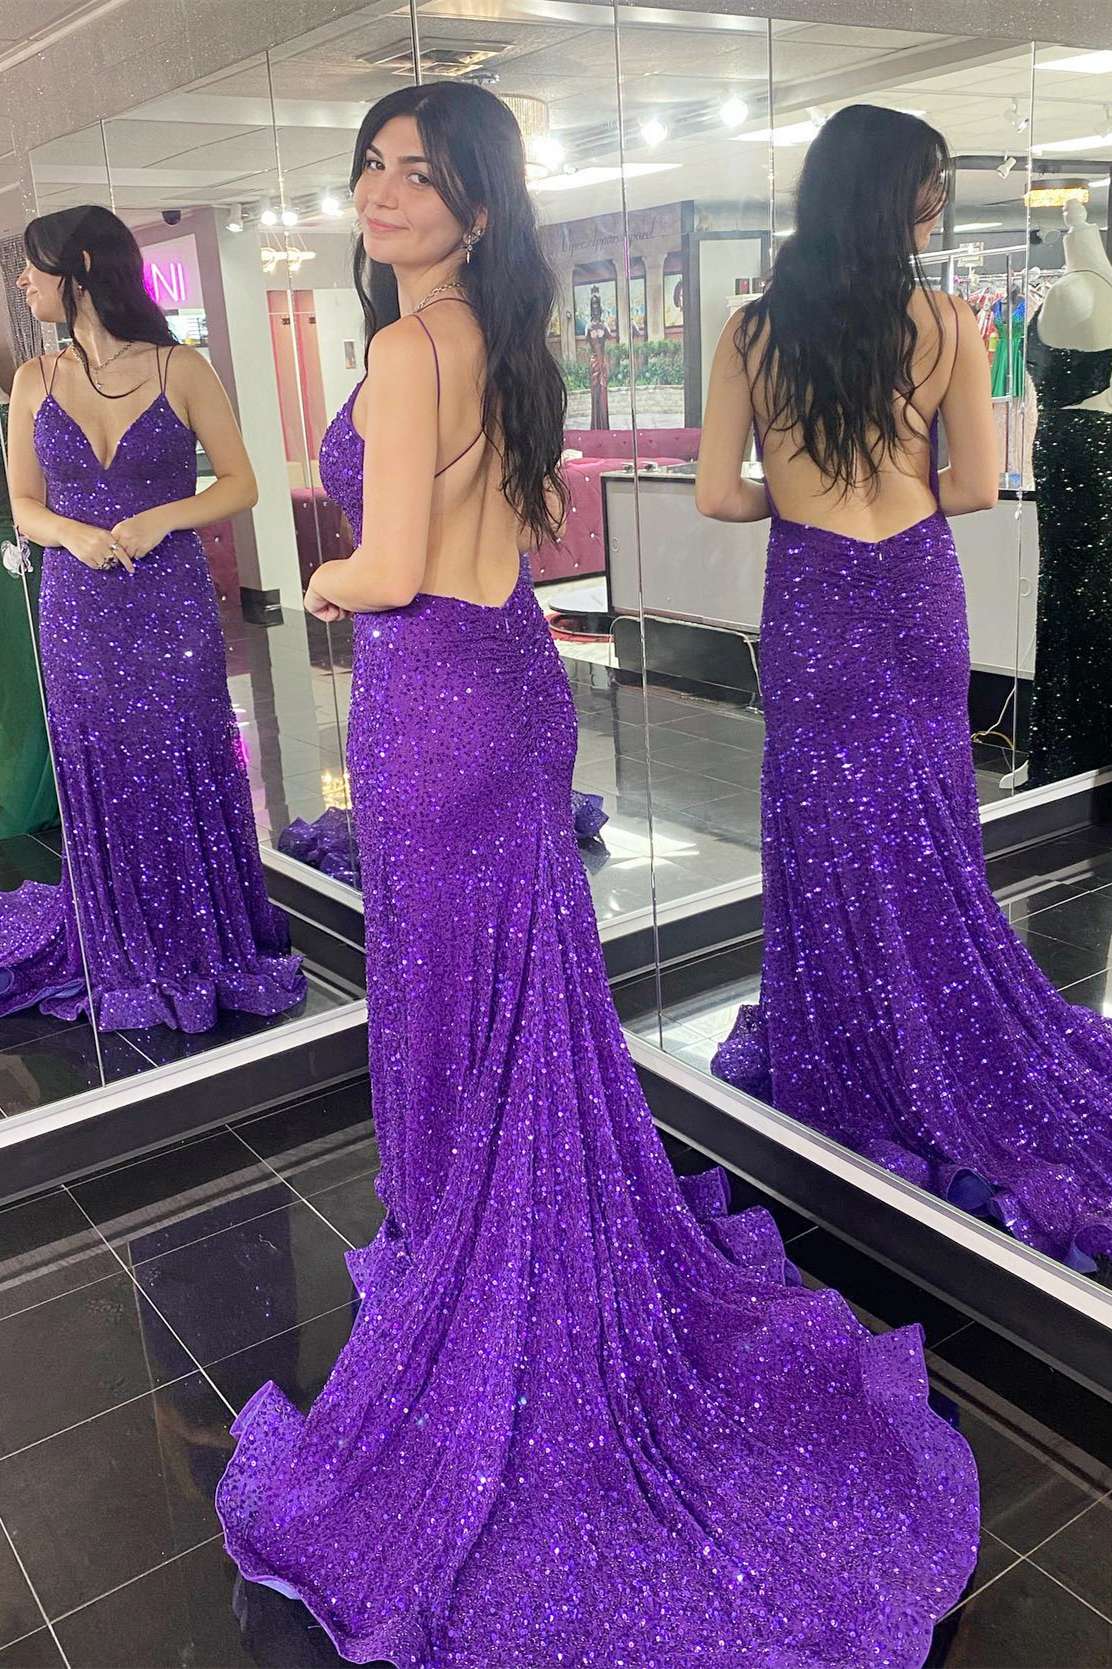 Arabic Dubai Navy Blue Lace Mermaid Purple Mermaid Prom Dress With Backless  Design, Ruffles, And Sweet 16 Gown For Black Girls Perfect For Parties And  Evening Events From Crown2014, $98.95 | DHgate.Com